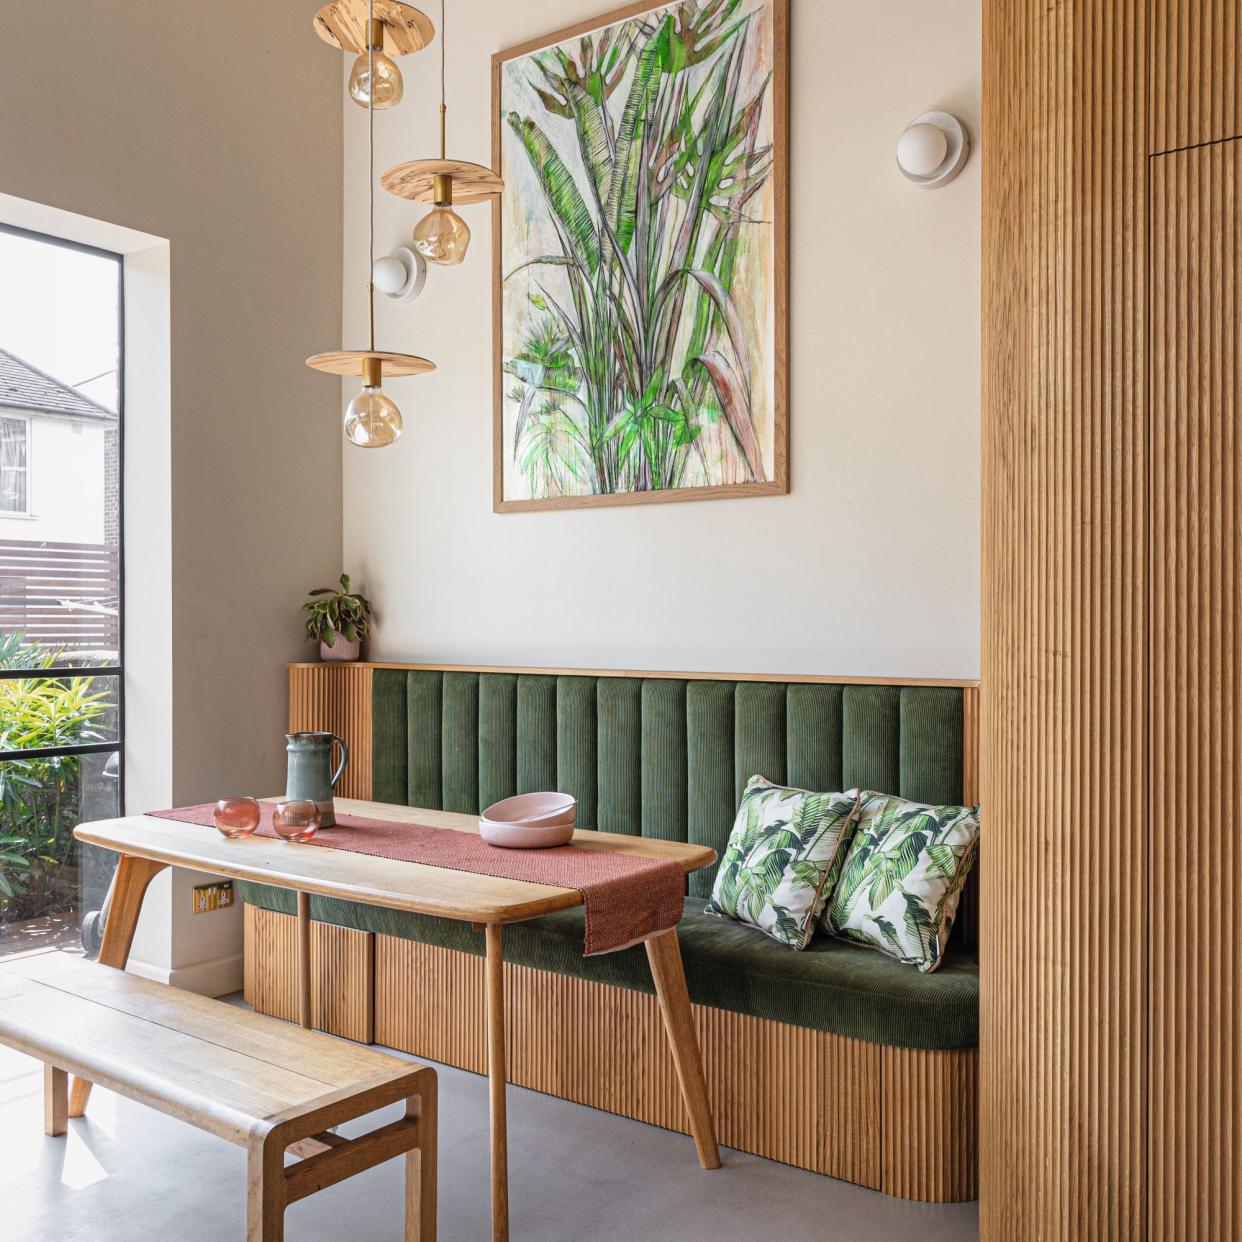  Green seating area, wooden dining table and artwork. 